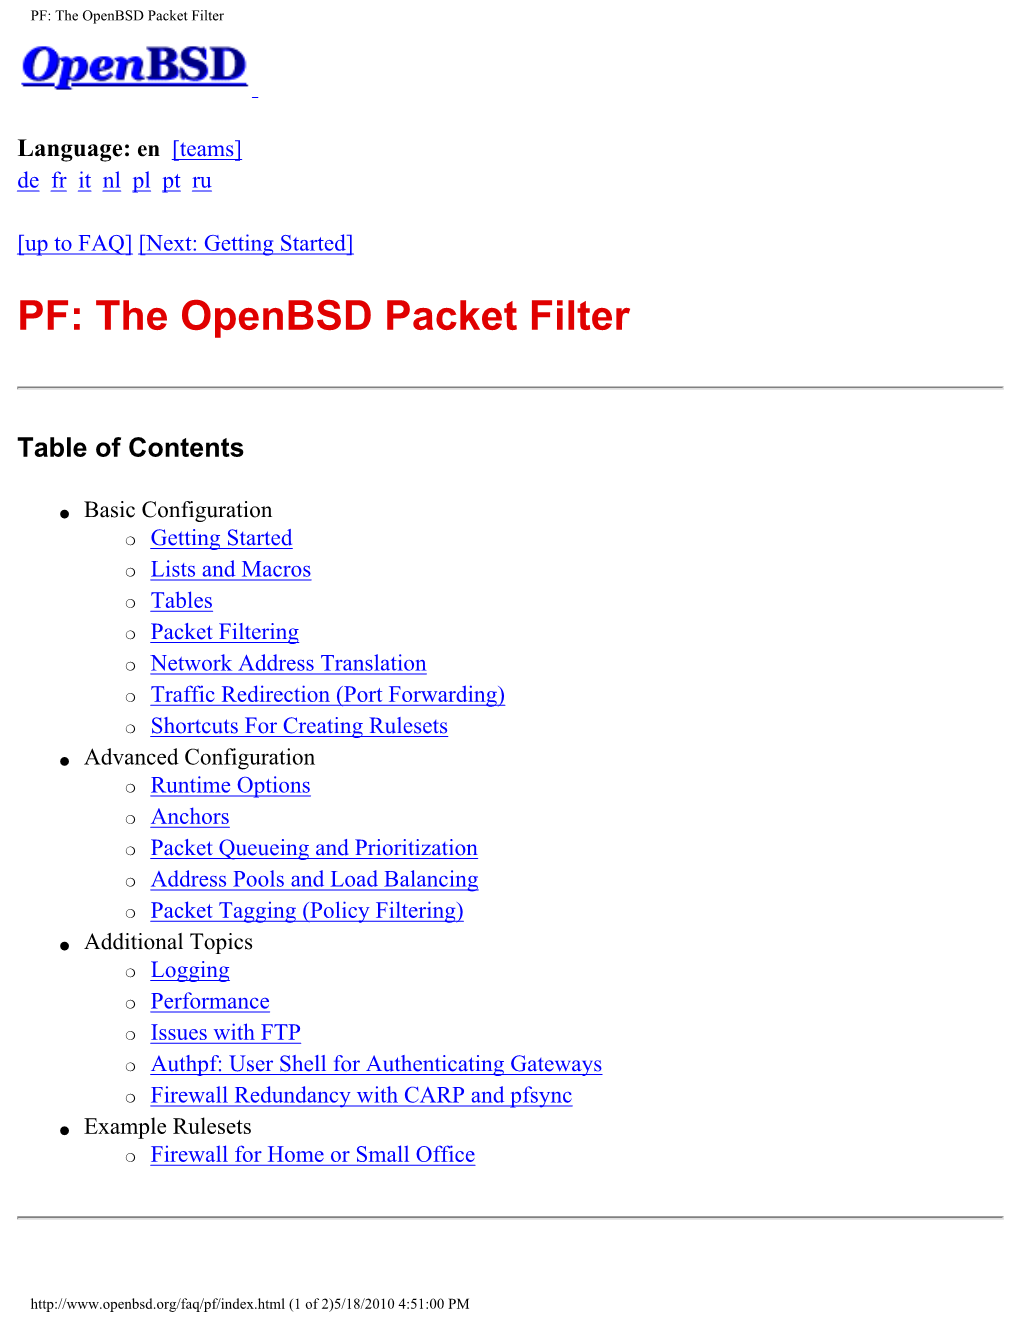 PF: the Openbsd Packet Filter